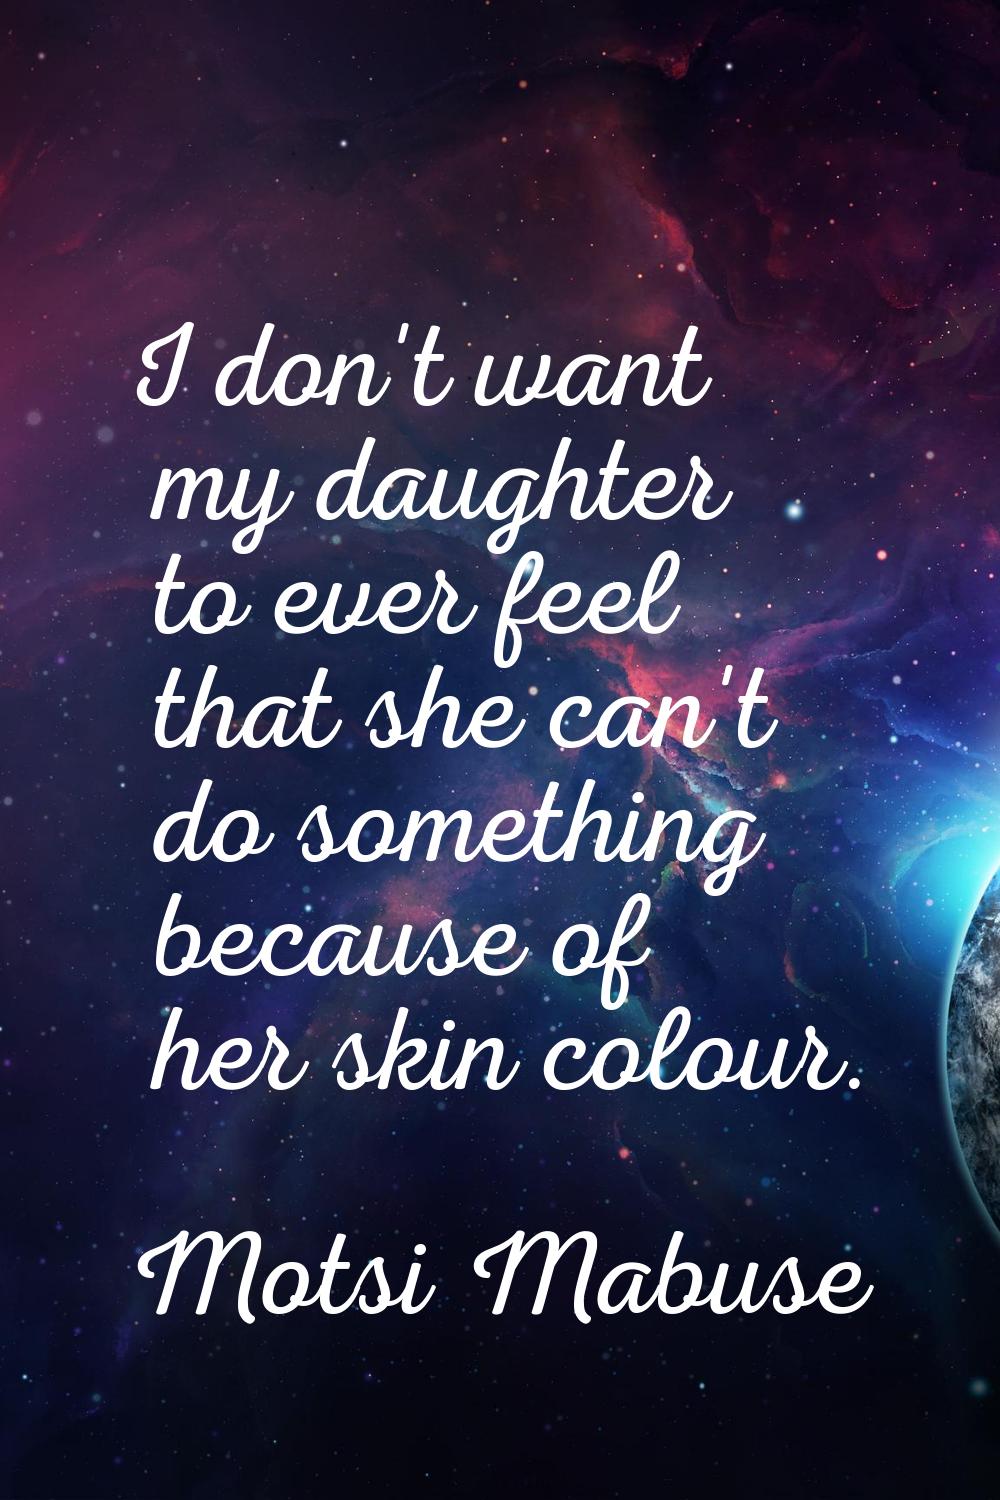 I don't want my daughter to ever feel that she can't do something because of her skin colour.